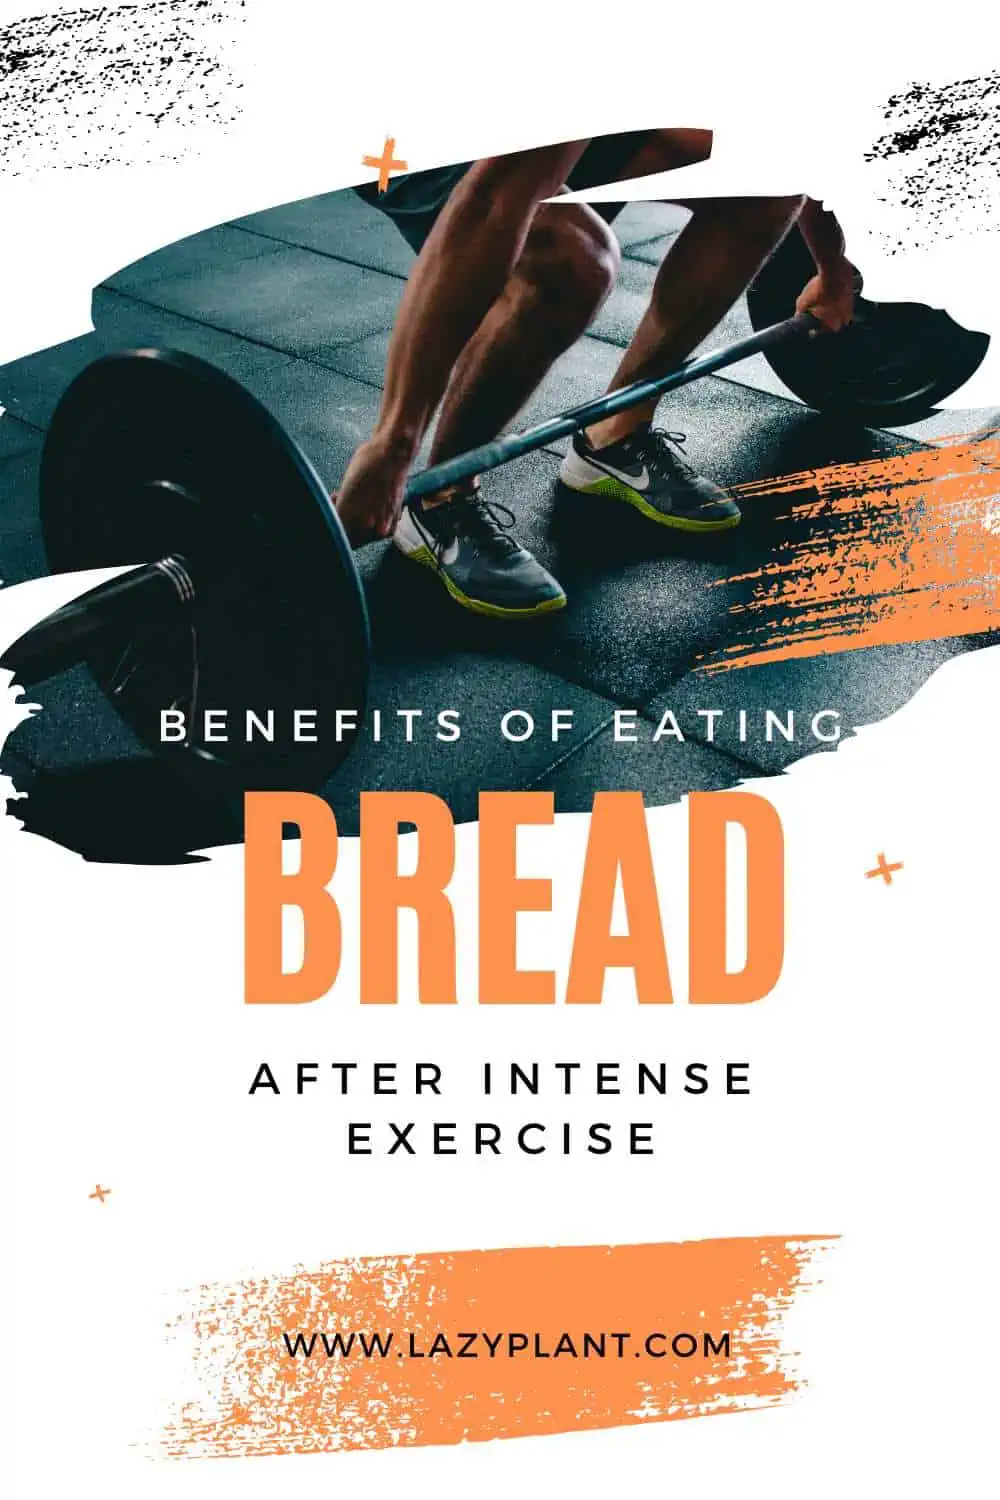 The best time of the day to eat white bread is after exercise!